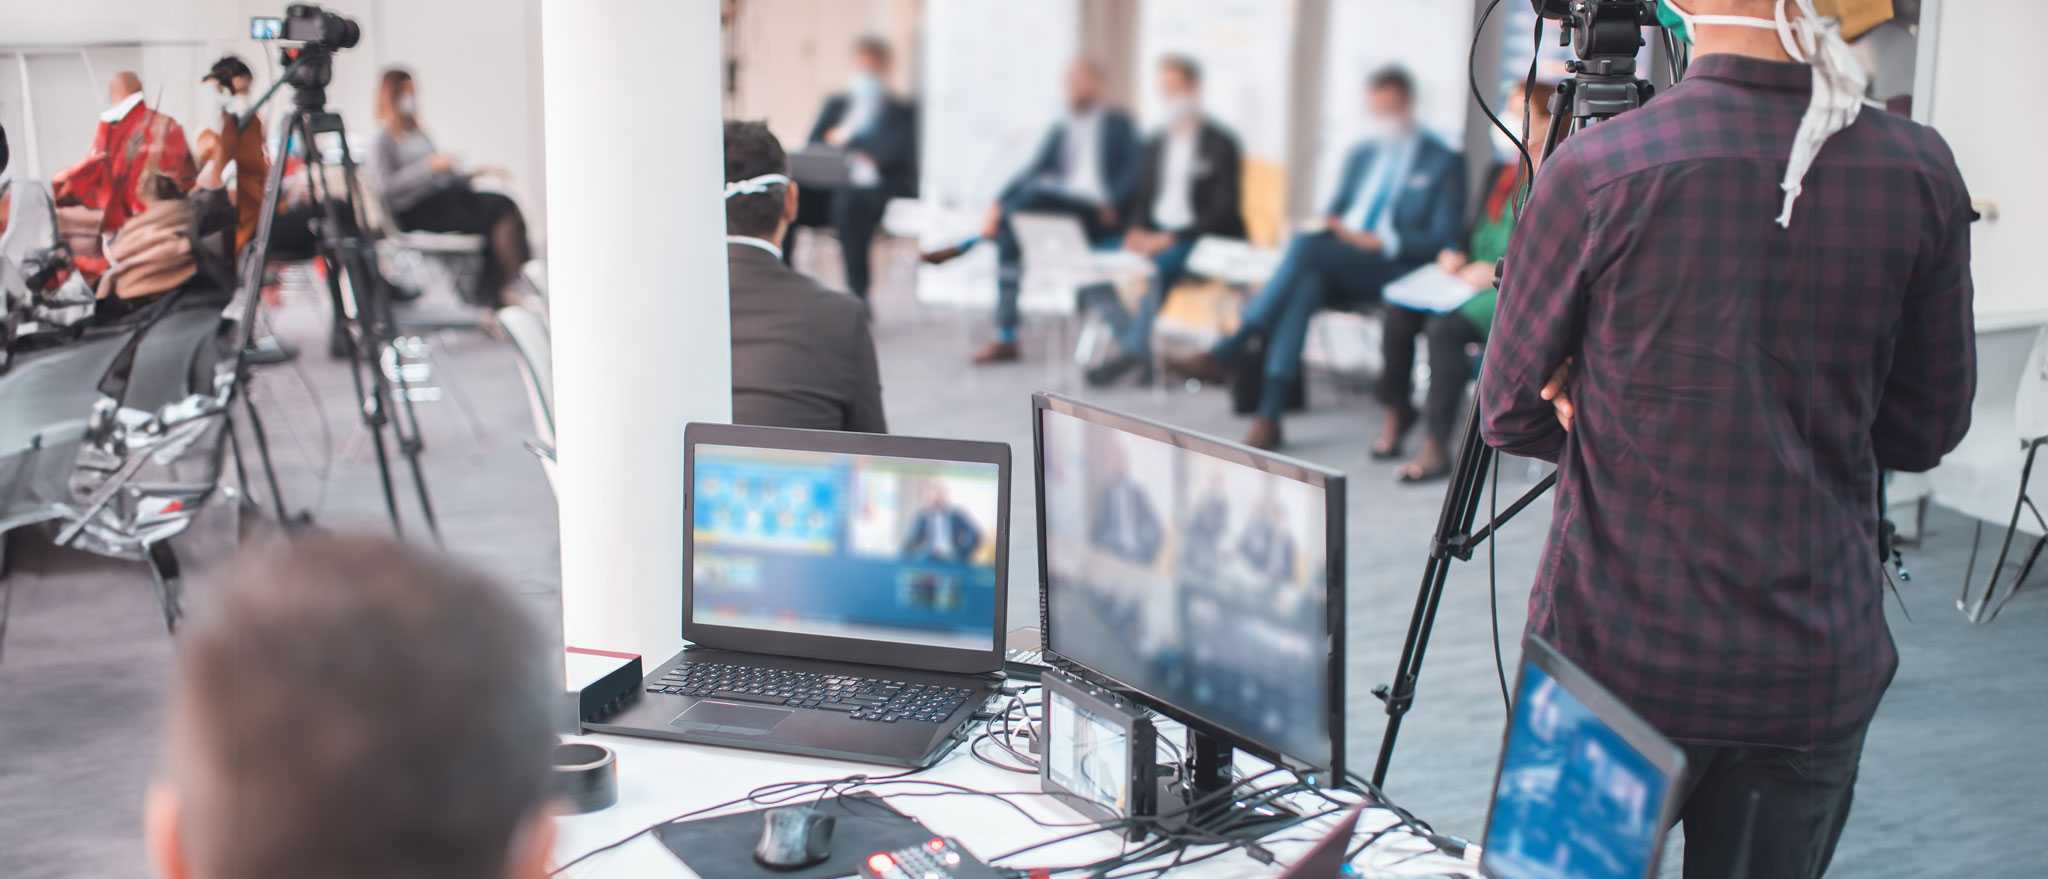 Event technology in use at an event